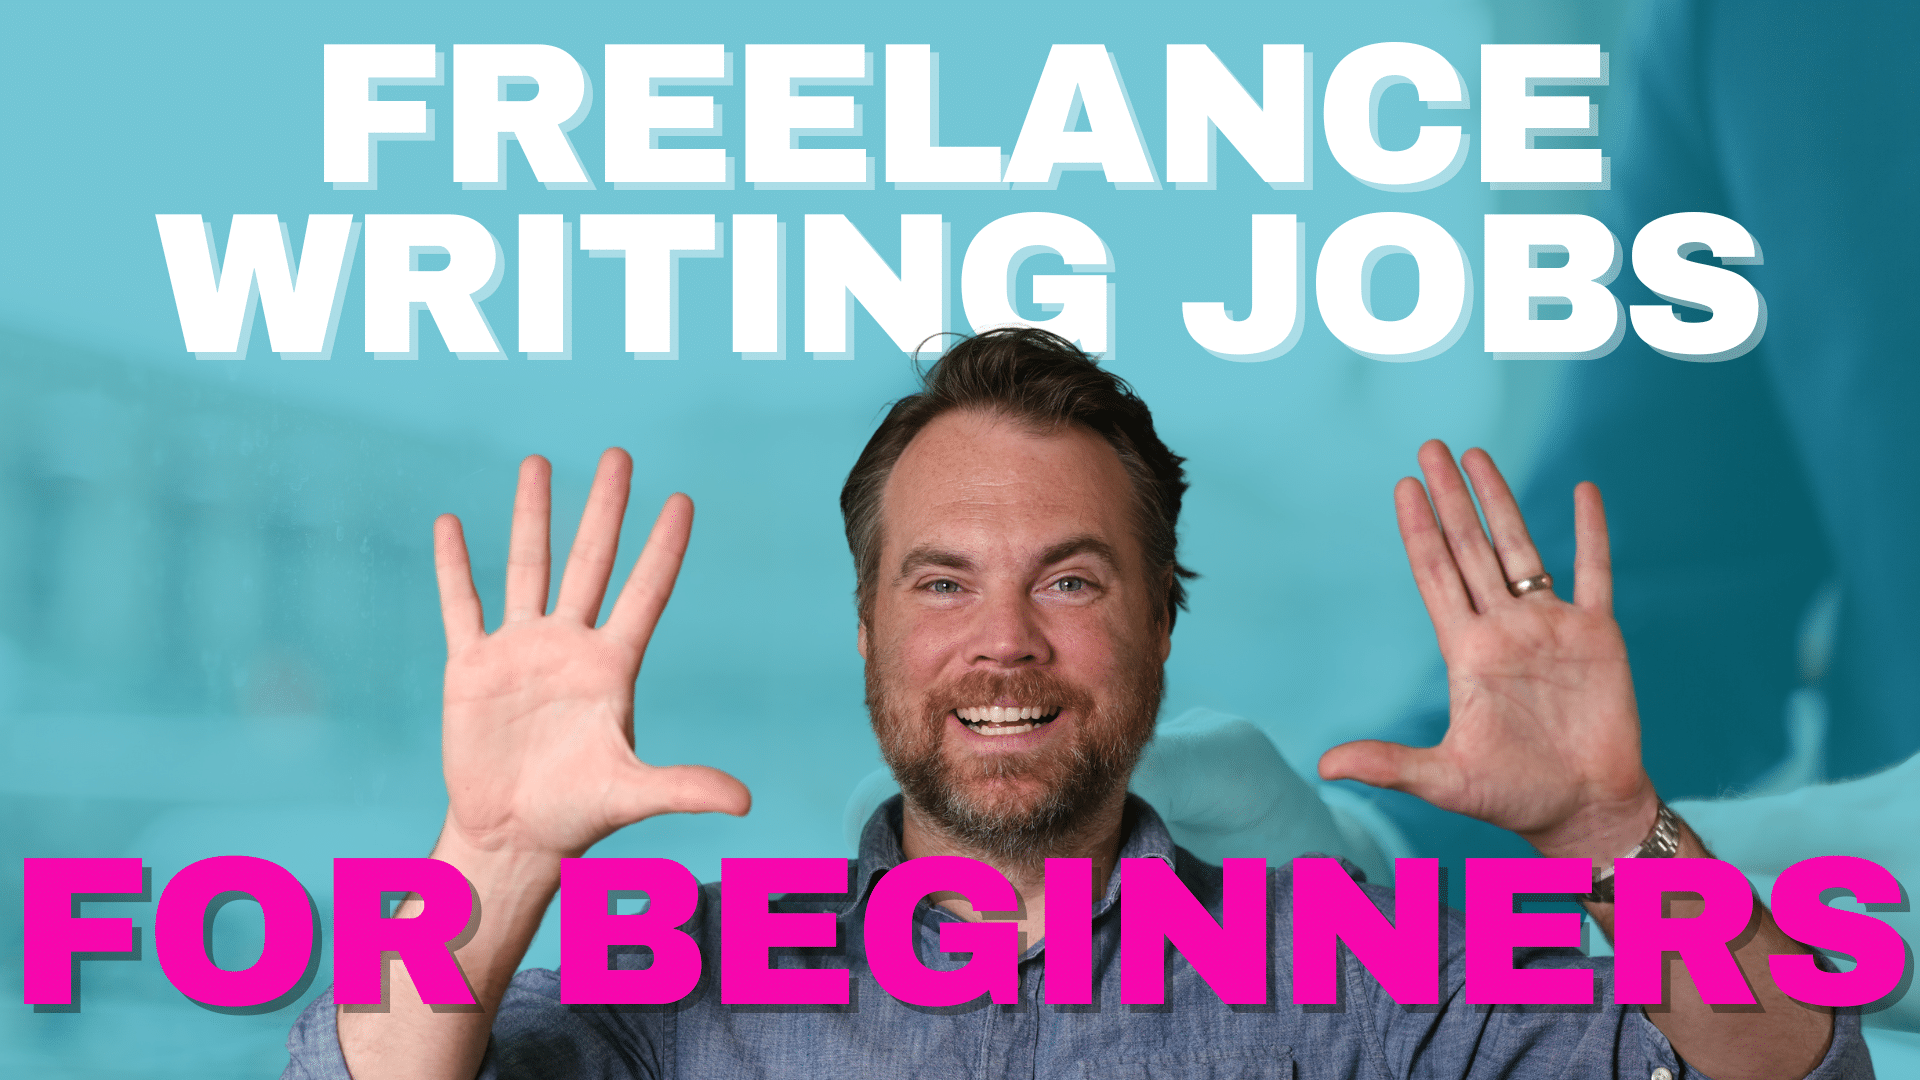 Freelance Writing Jobs for Beginners: 10 Strategies to Land Your First Job